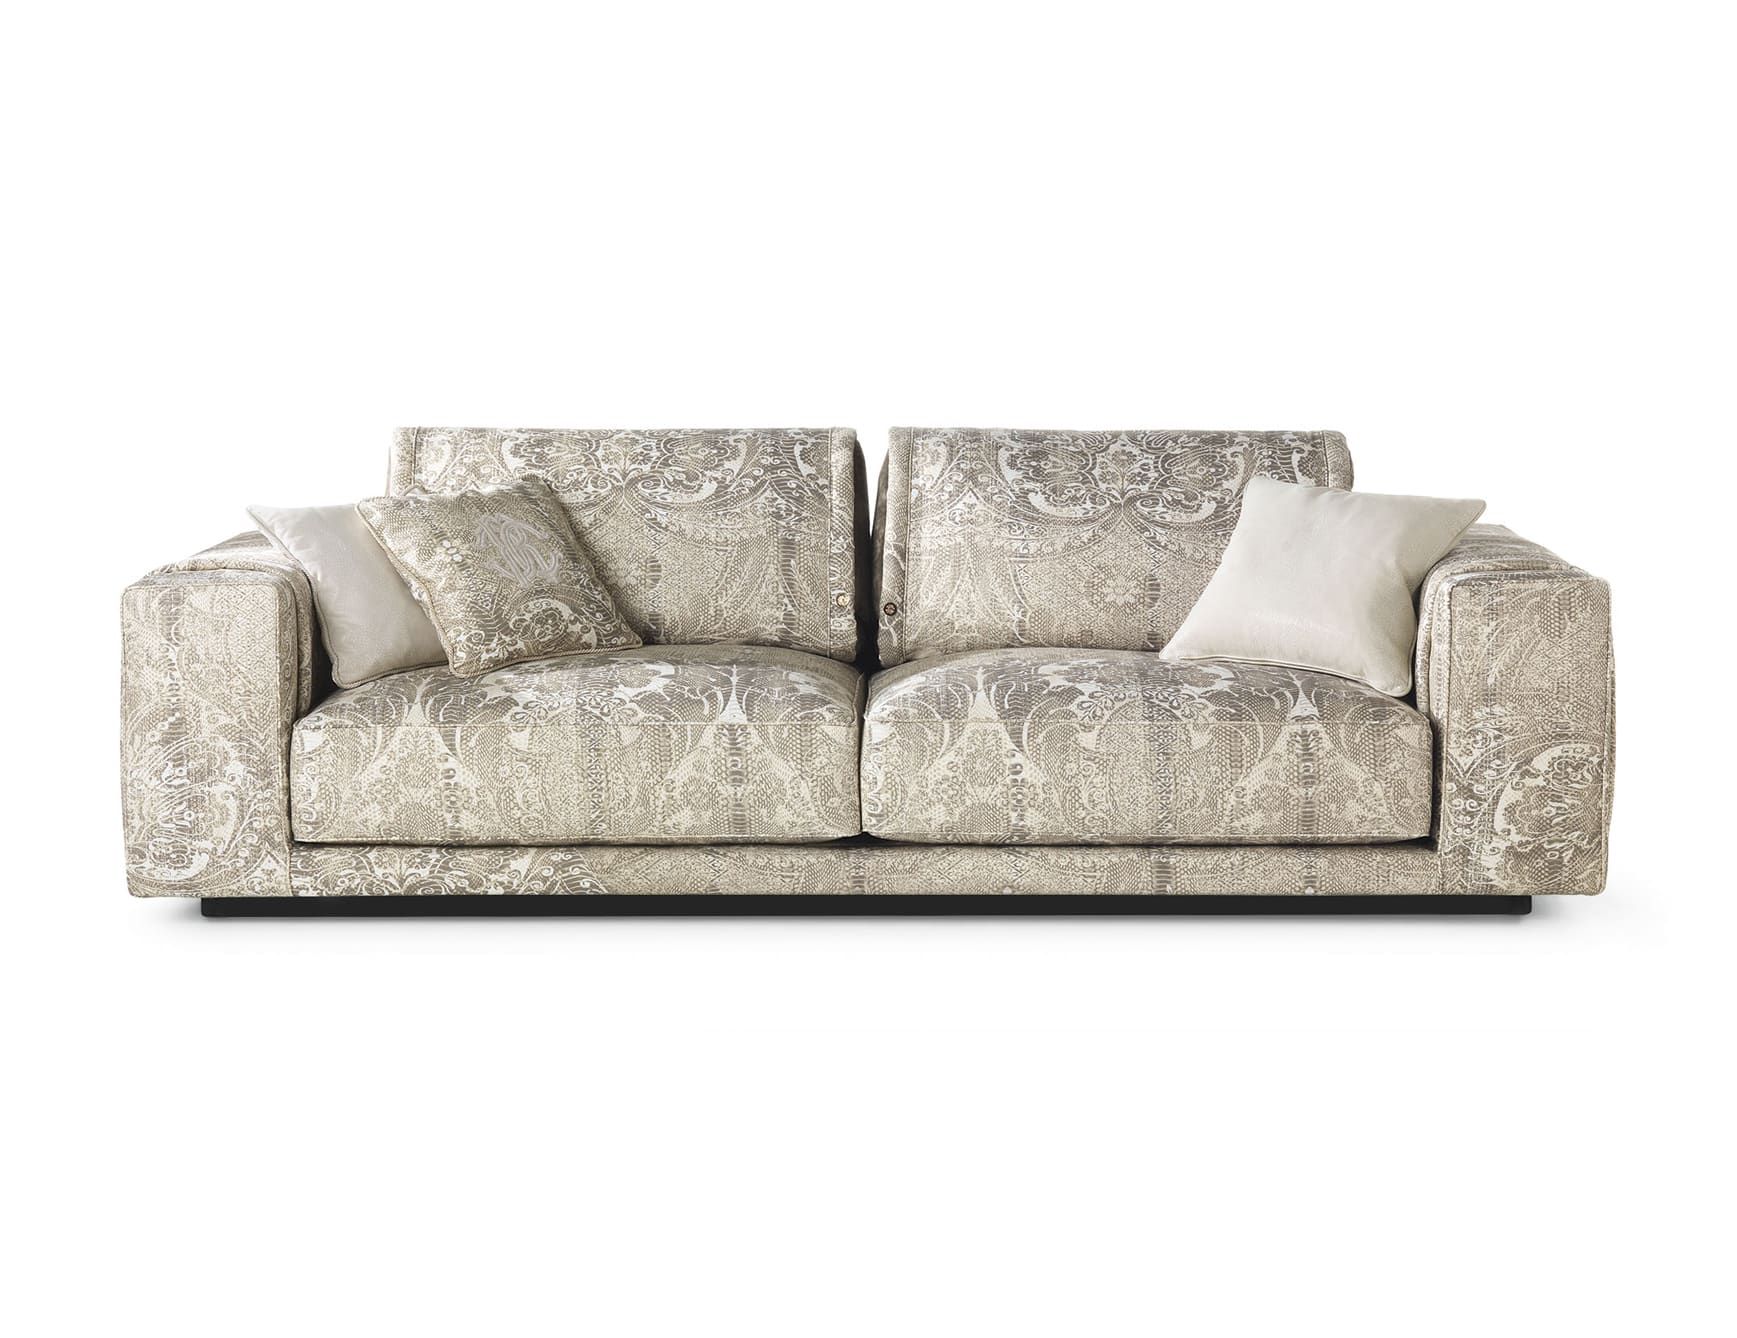 Smoking modern luxury sofa chair with ivory leather